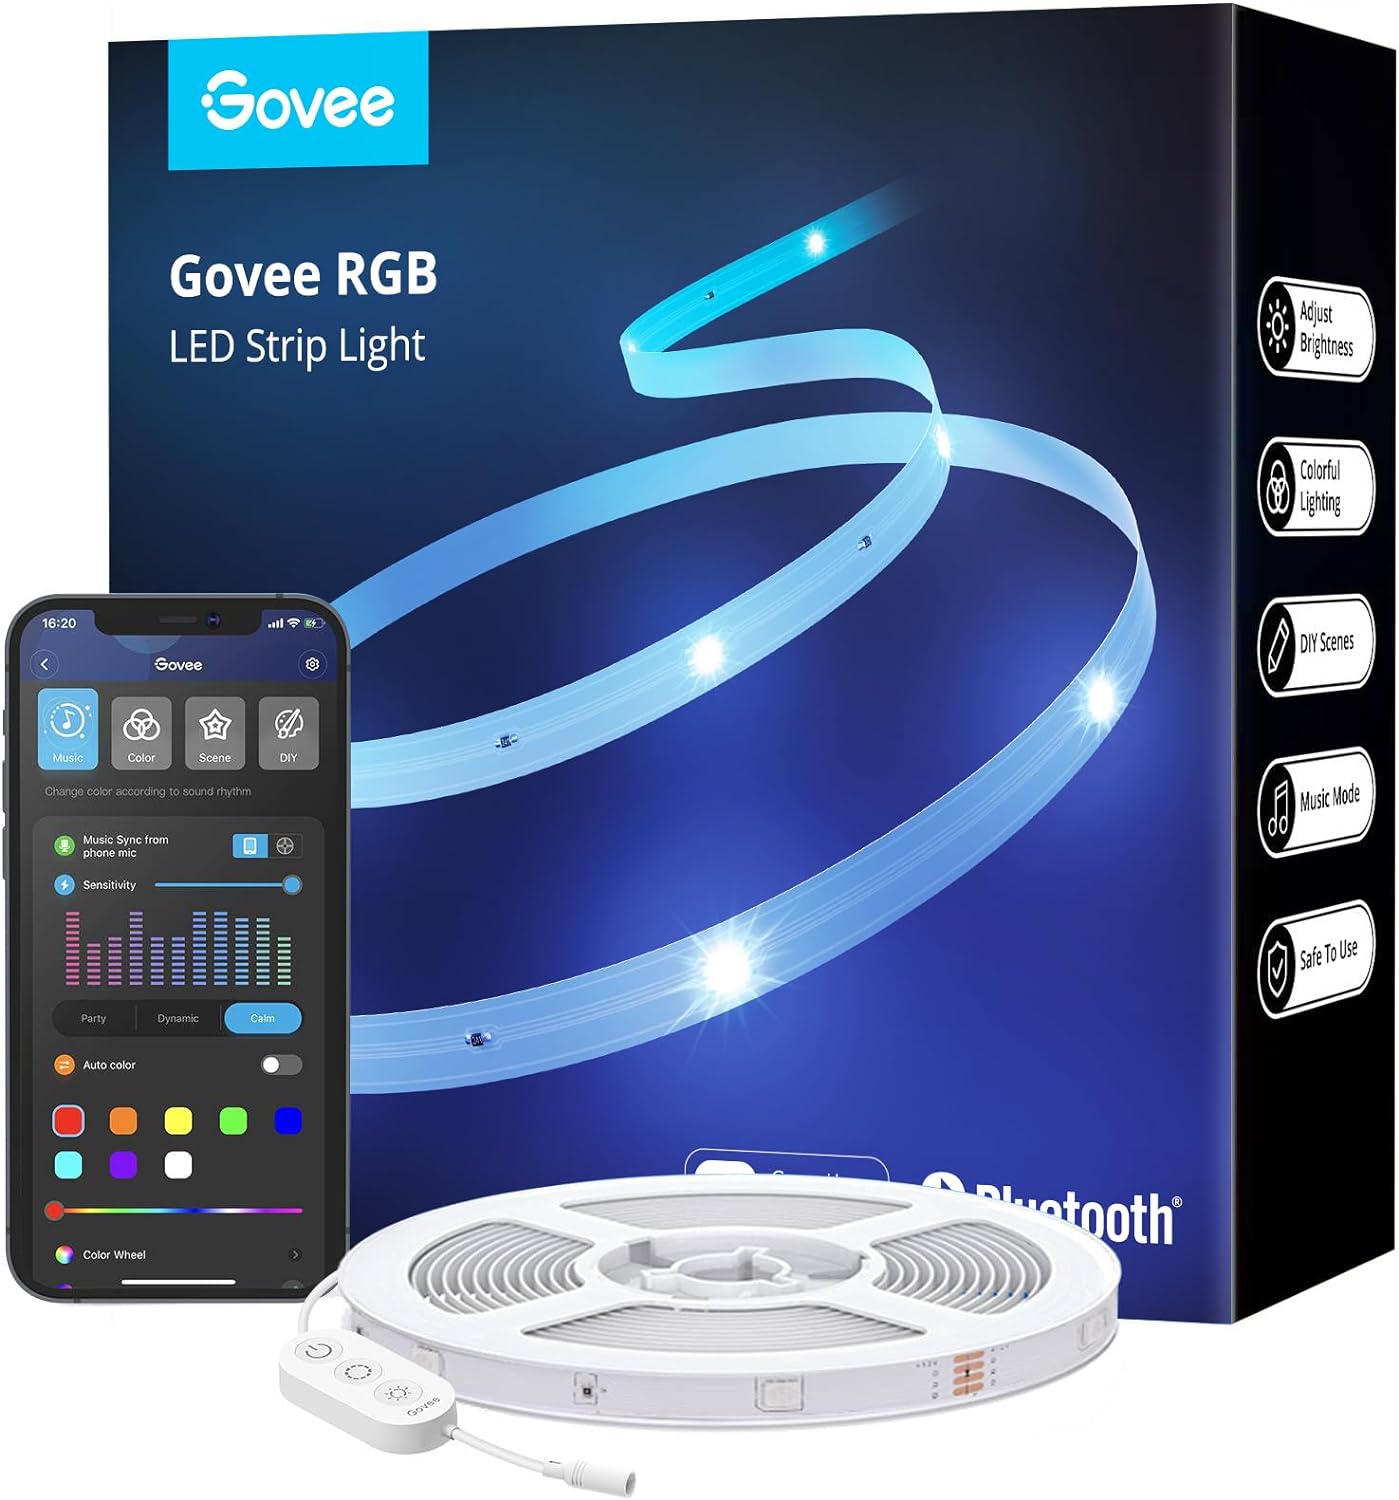 The Govee 130ft LED Strip Lights are an excellent choice for anyone looking to add vibrant and customizable lighting to their home. With Bluetooth connectivity, app control, and a wide range of features, these LED strip lights offer a truly immersive lighting experience.One of the standout features of the Govee LED Strip Lights is their length. With two rolls of 65ft each, you have plenty of flexibility to cover large areas or create intricate lighting designs. Whether you want to illuminate you